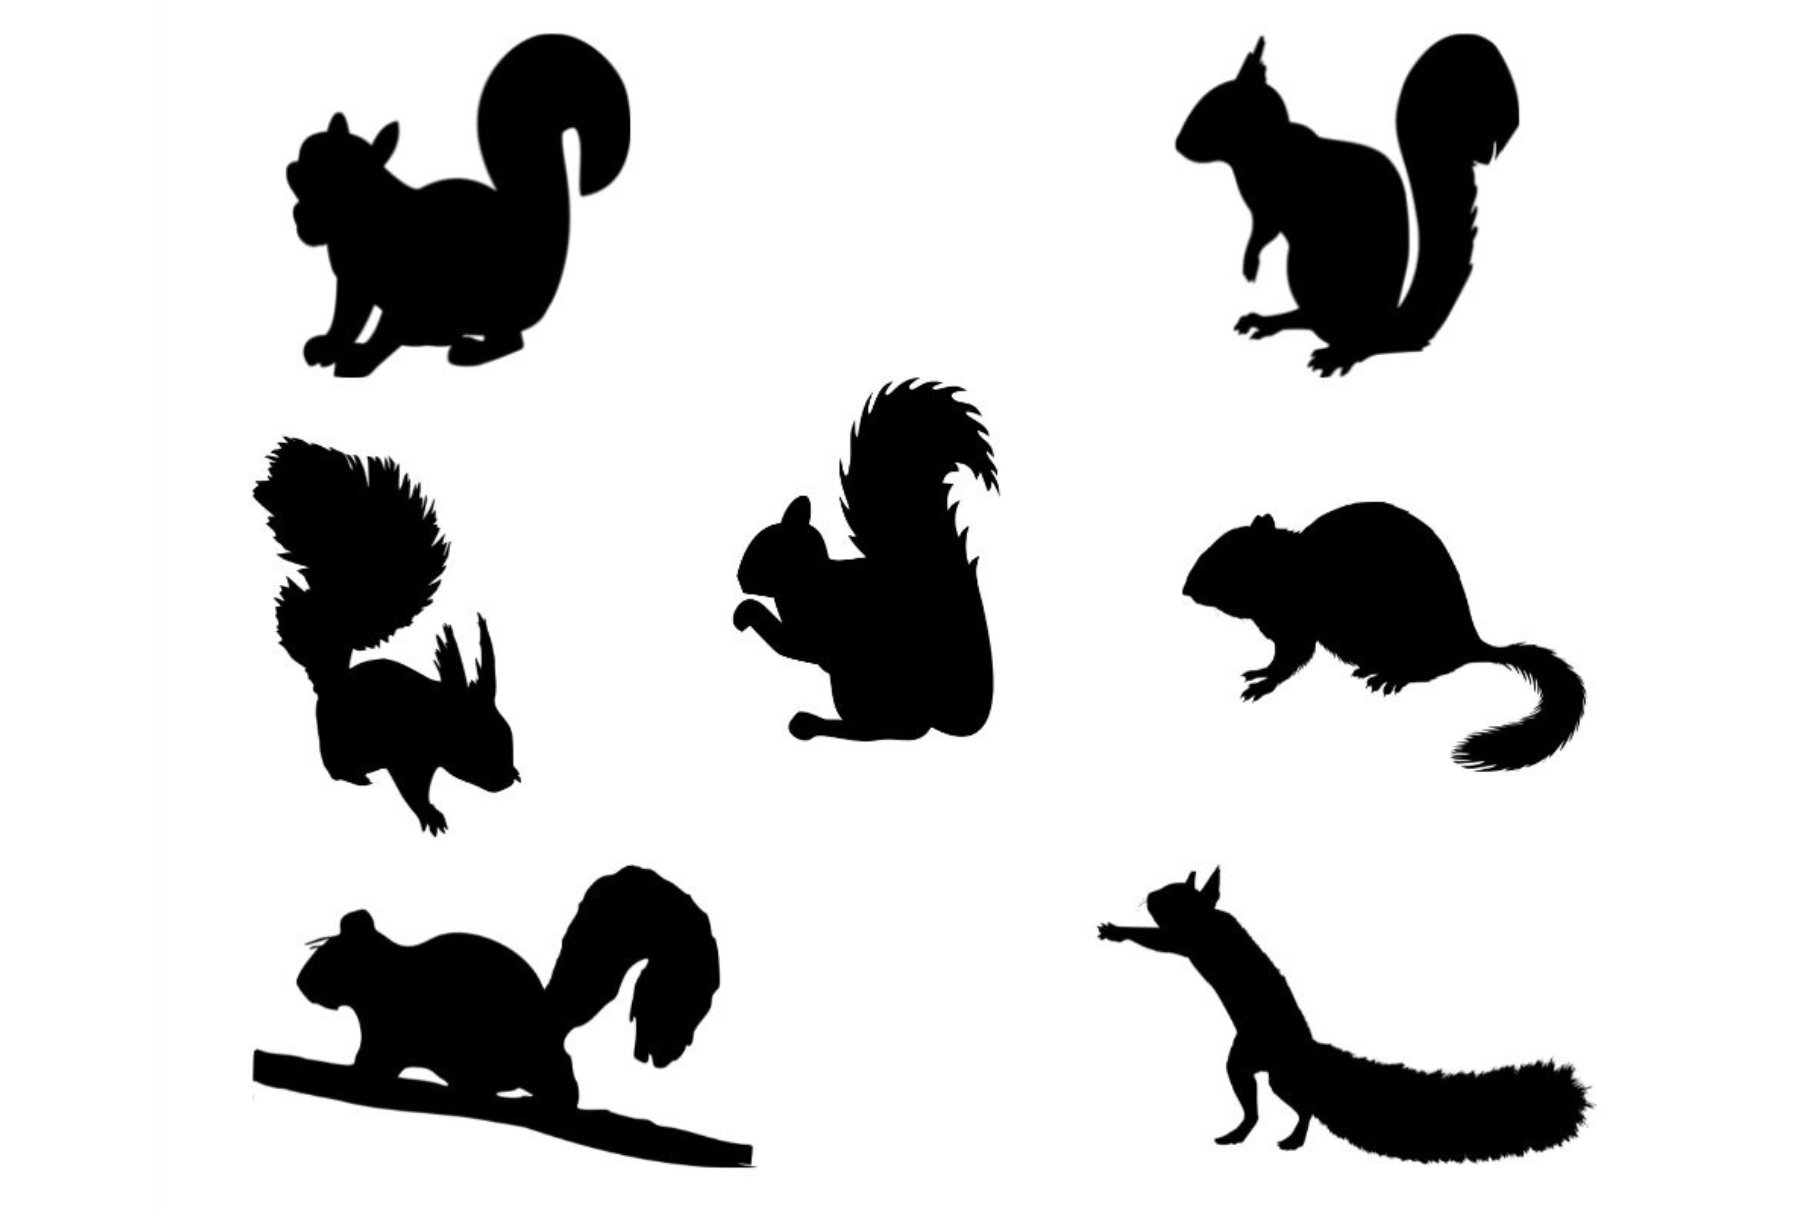 Squirrel Silhouette cover image.